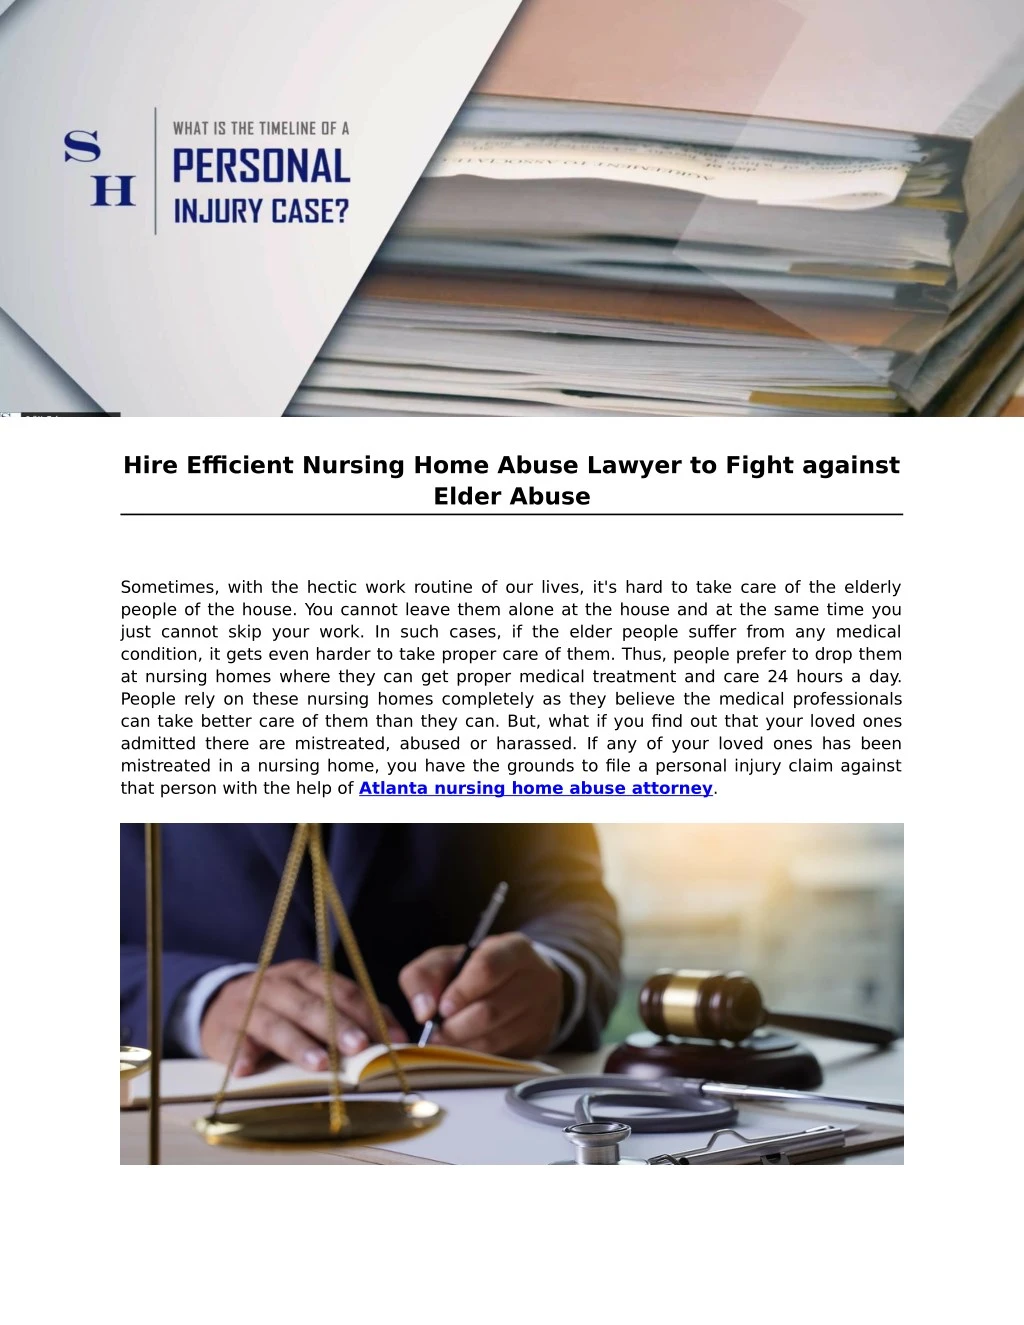 hire efficient nursing home abuse lawyer to fight